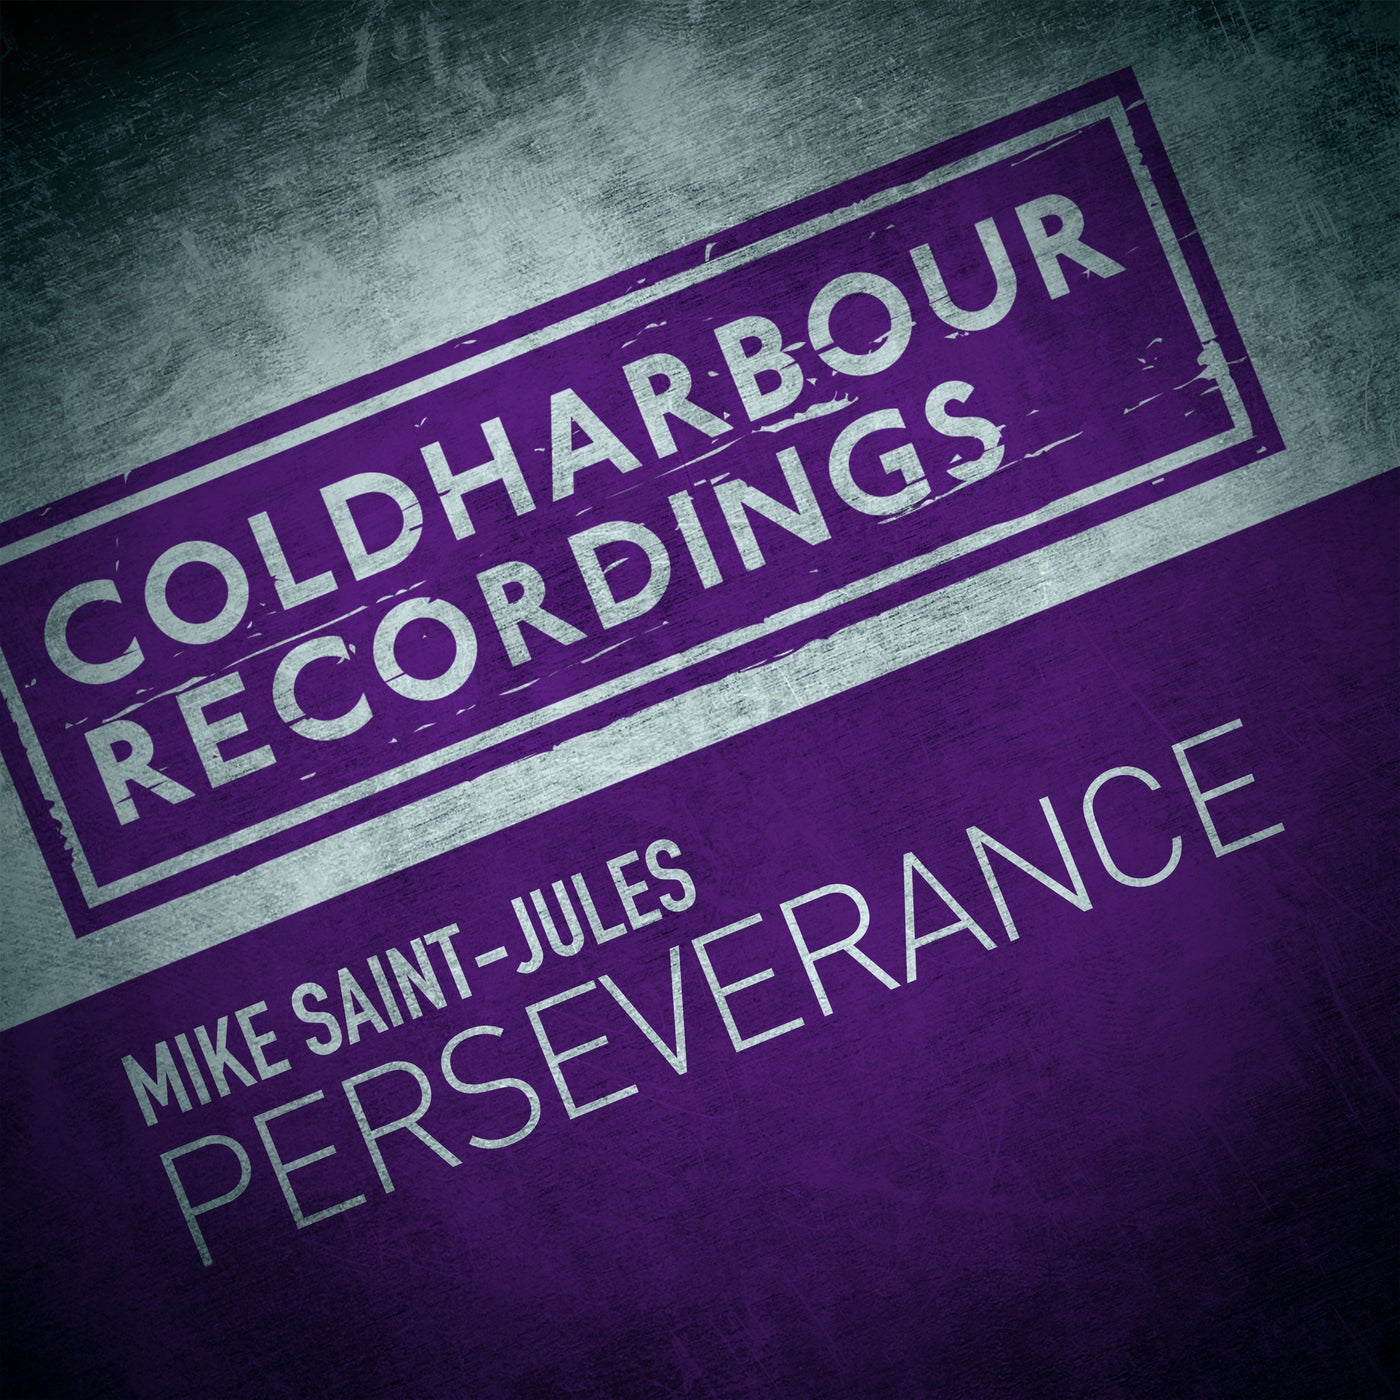 image cover: Mike Saint-Jules - Perseverance on Coldharbour Recordings